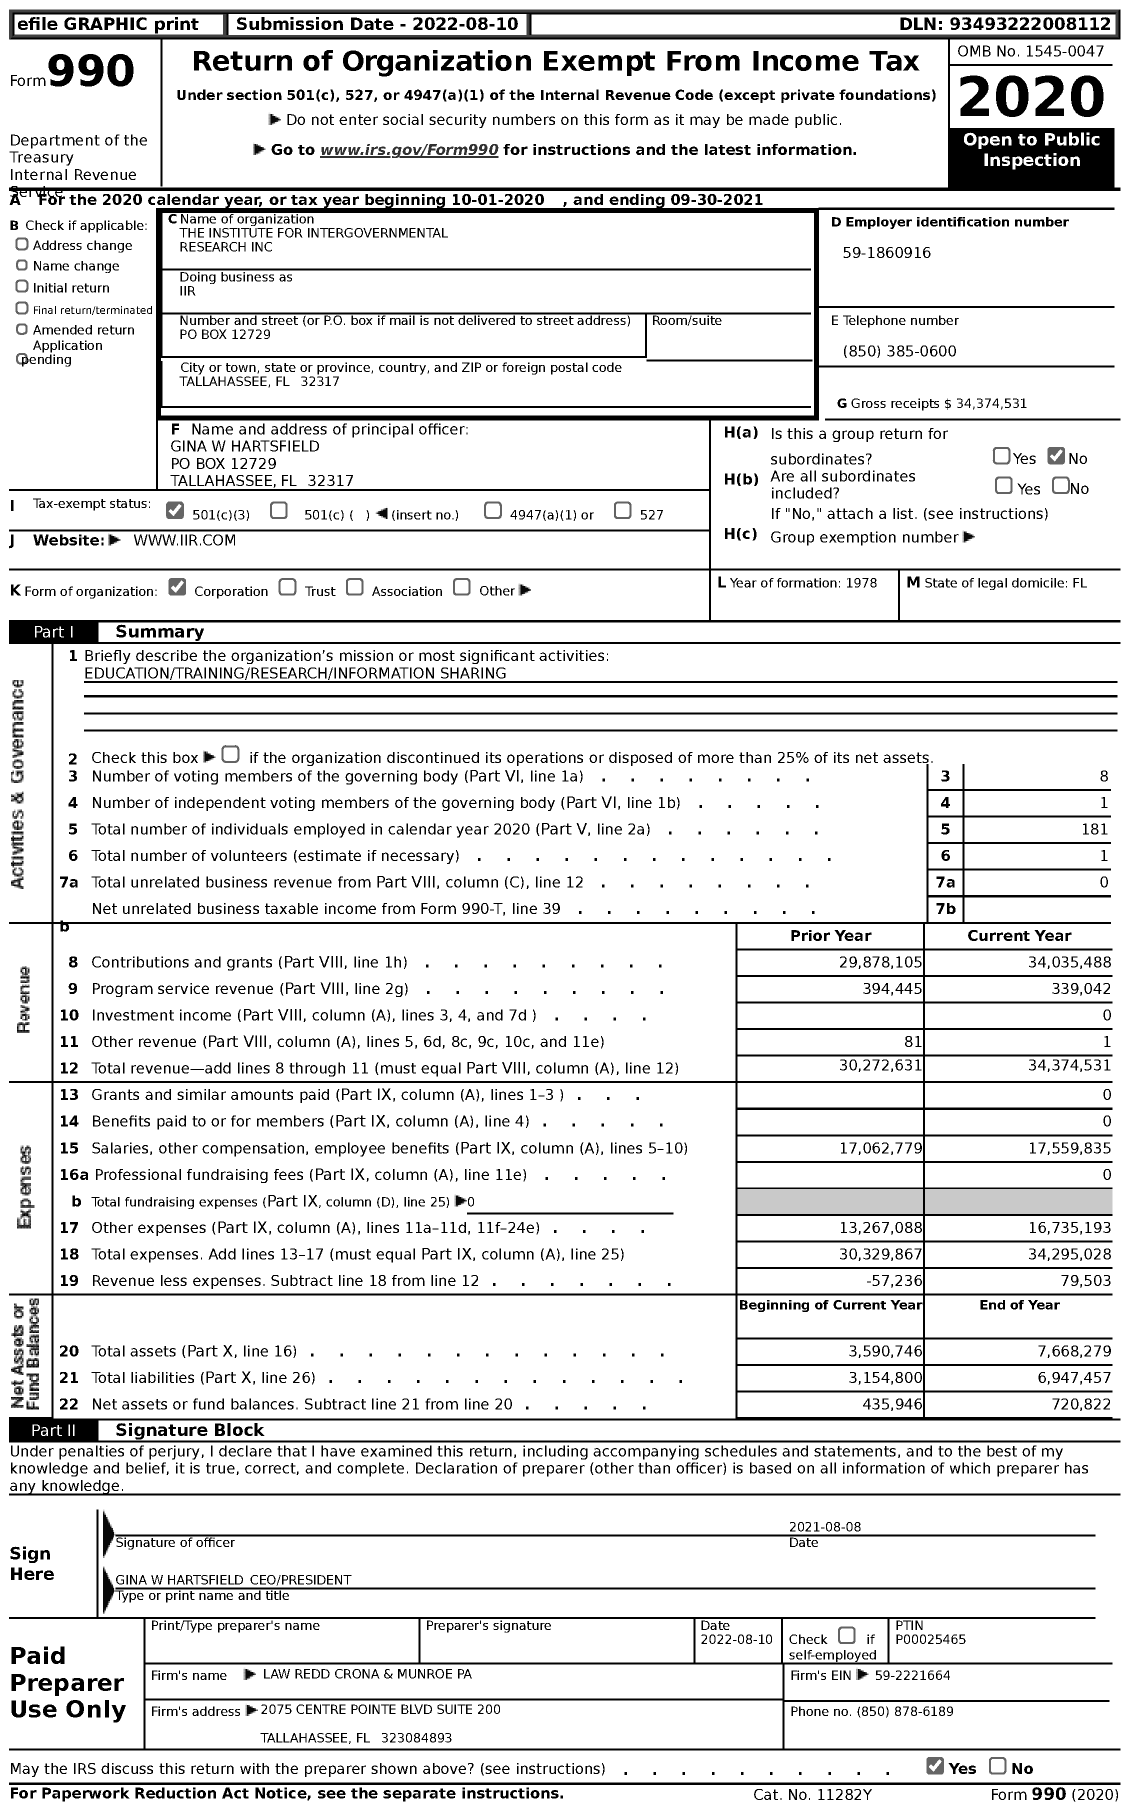 Image of first page of 2020 Form 990 for The Institute for Intergovernmental Research (IIR)